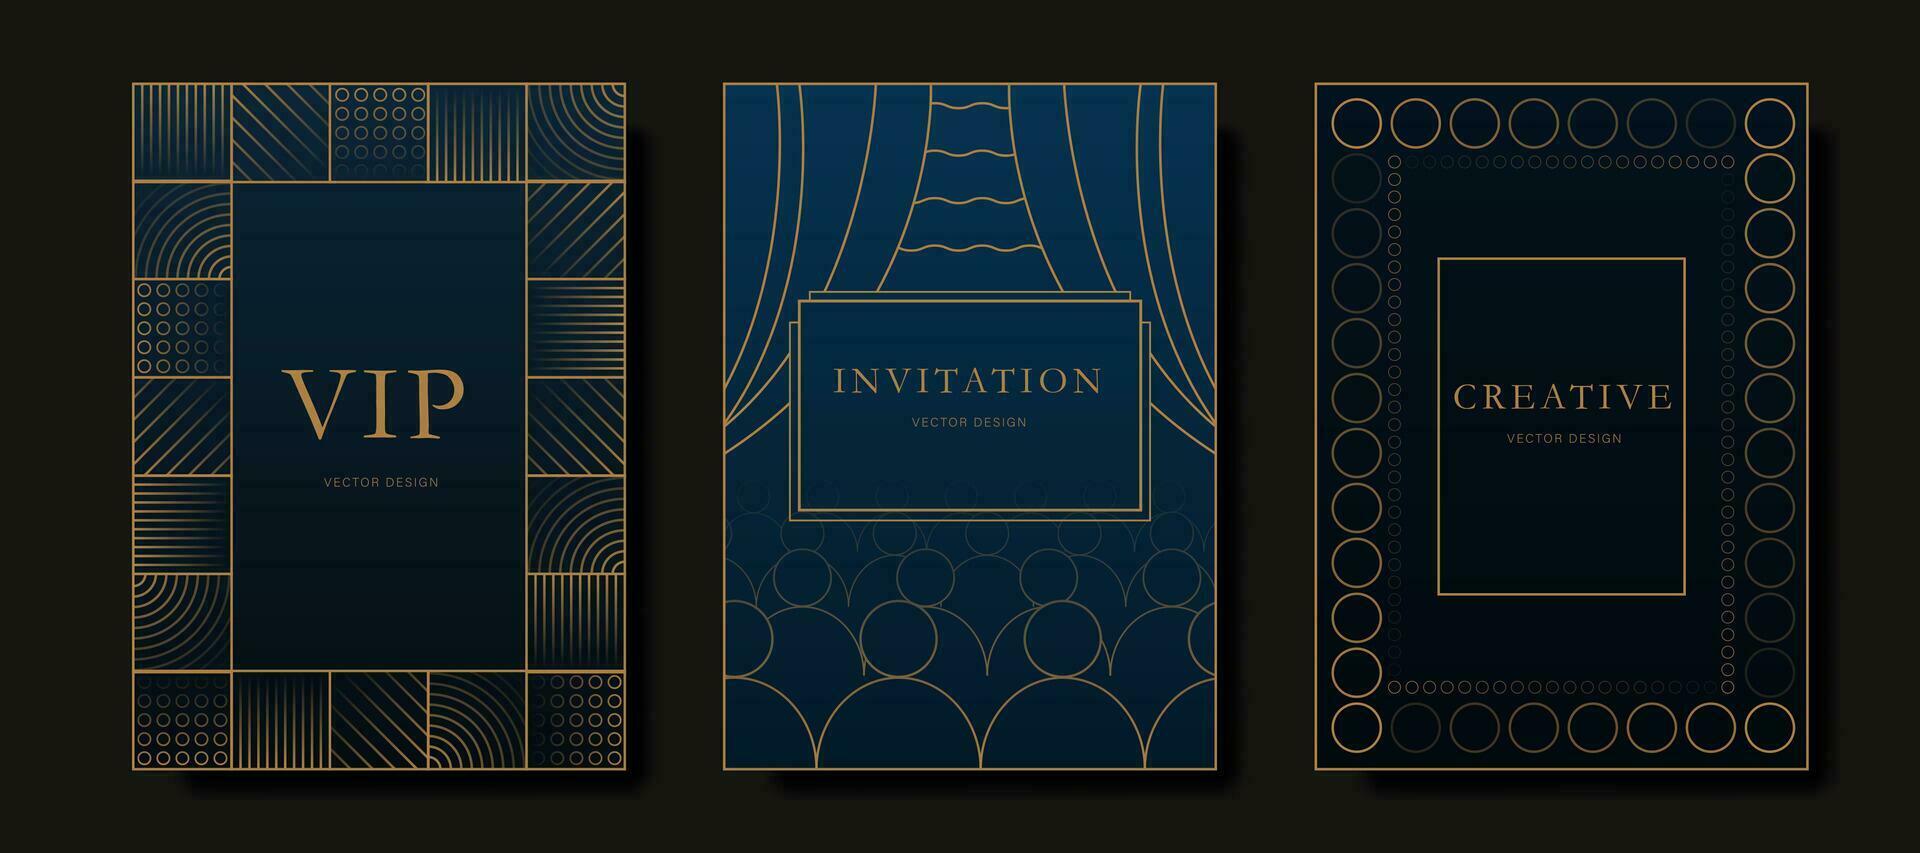 An elegant classic invitation card or postcard in an antique design with gold lines. Vector illustration.